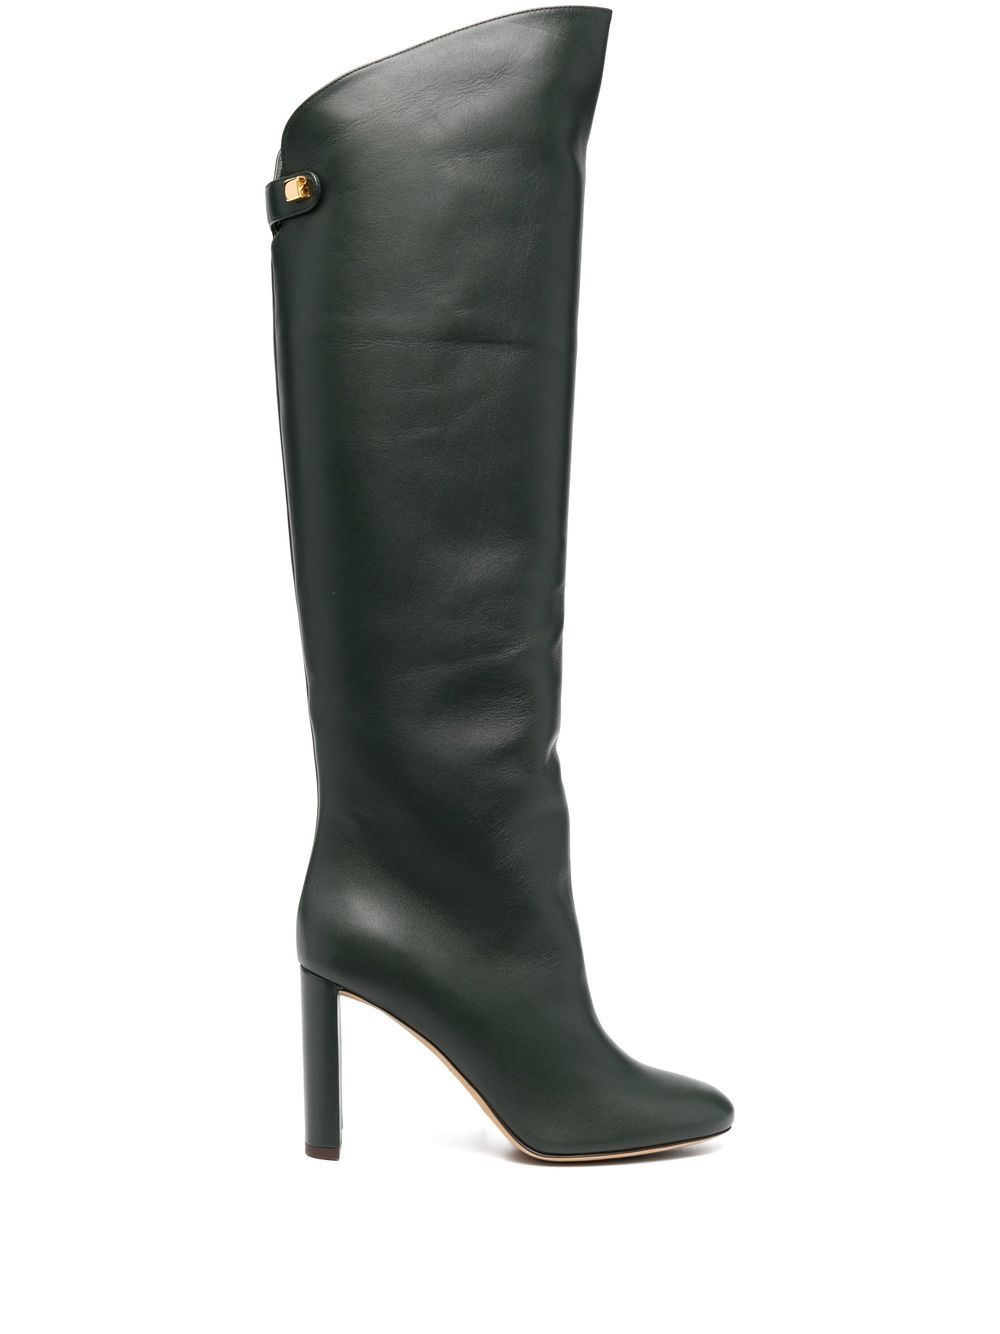 Maison Skorpios knee-high leather boots